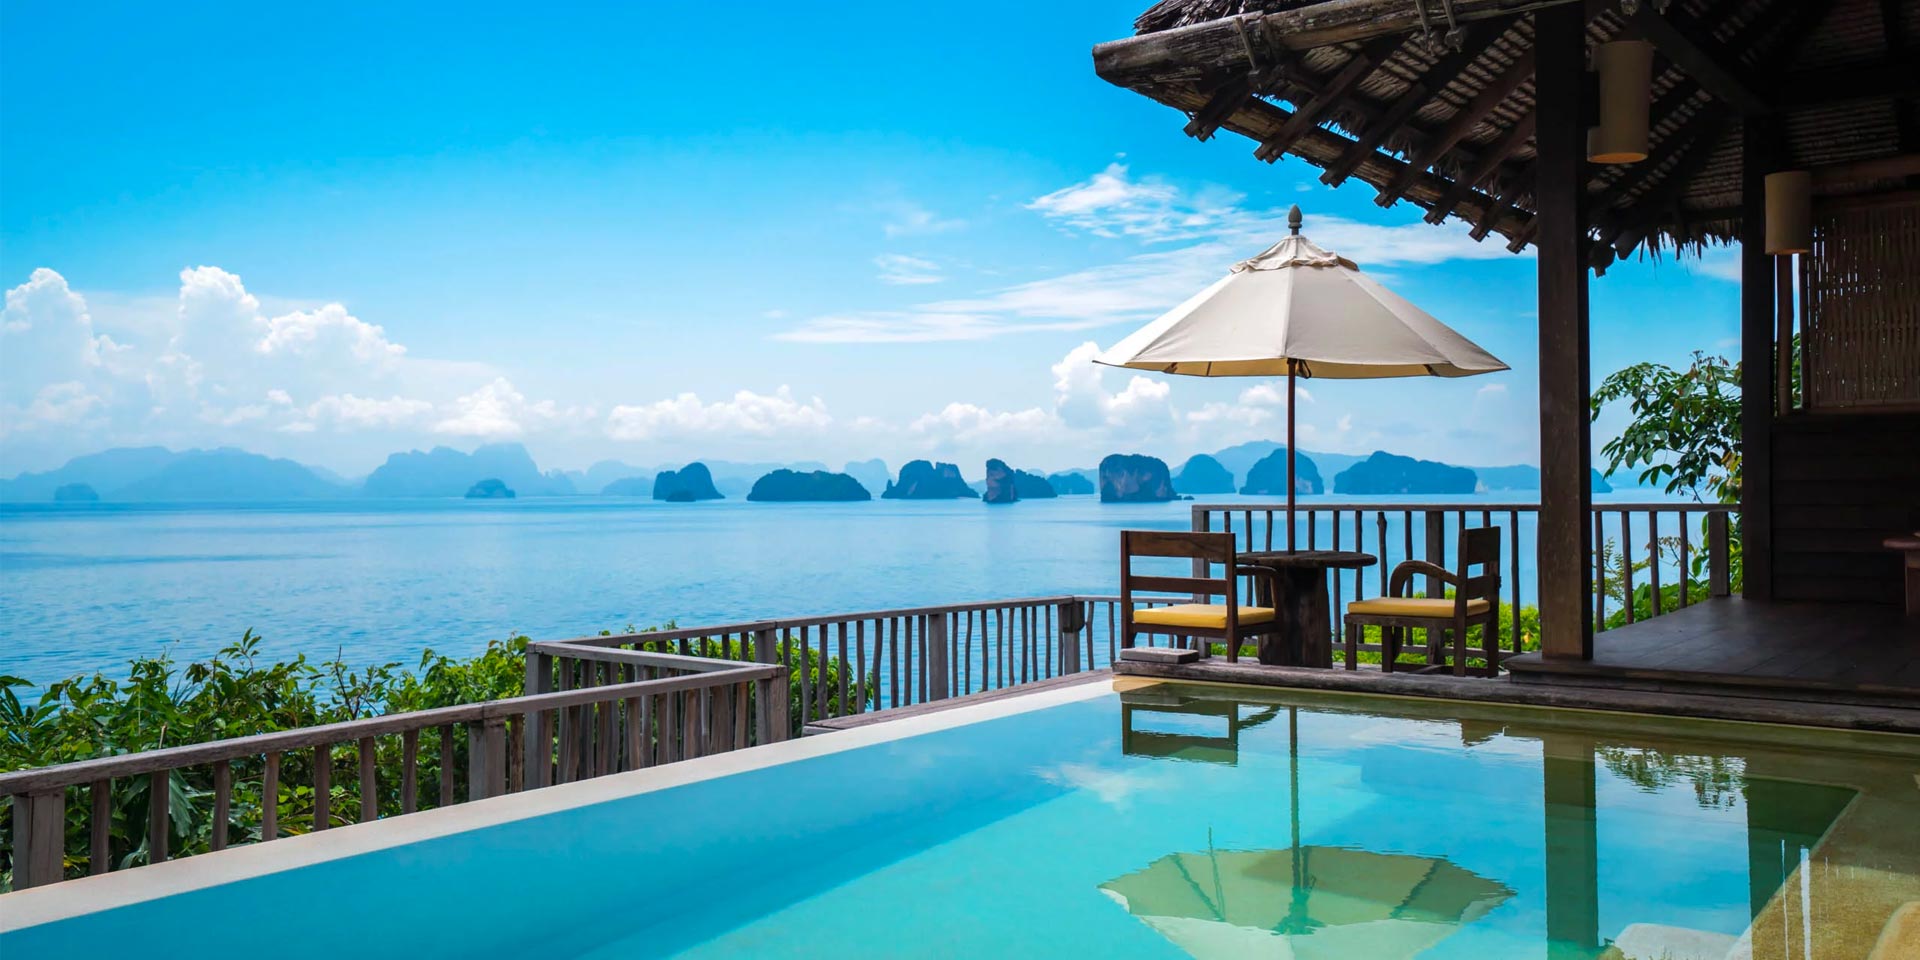 Top 10 Luxury Phuket Resorts: The Ultimate Luxury Guide to Thailand's Most Famous Island - Travelogues from Lands